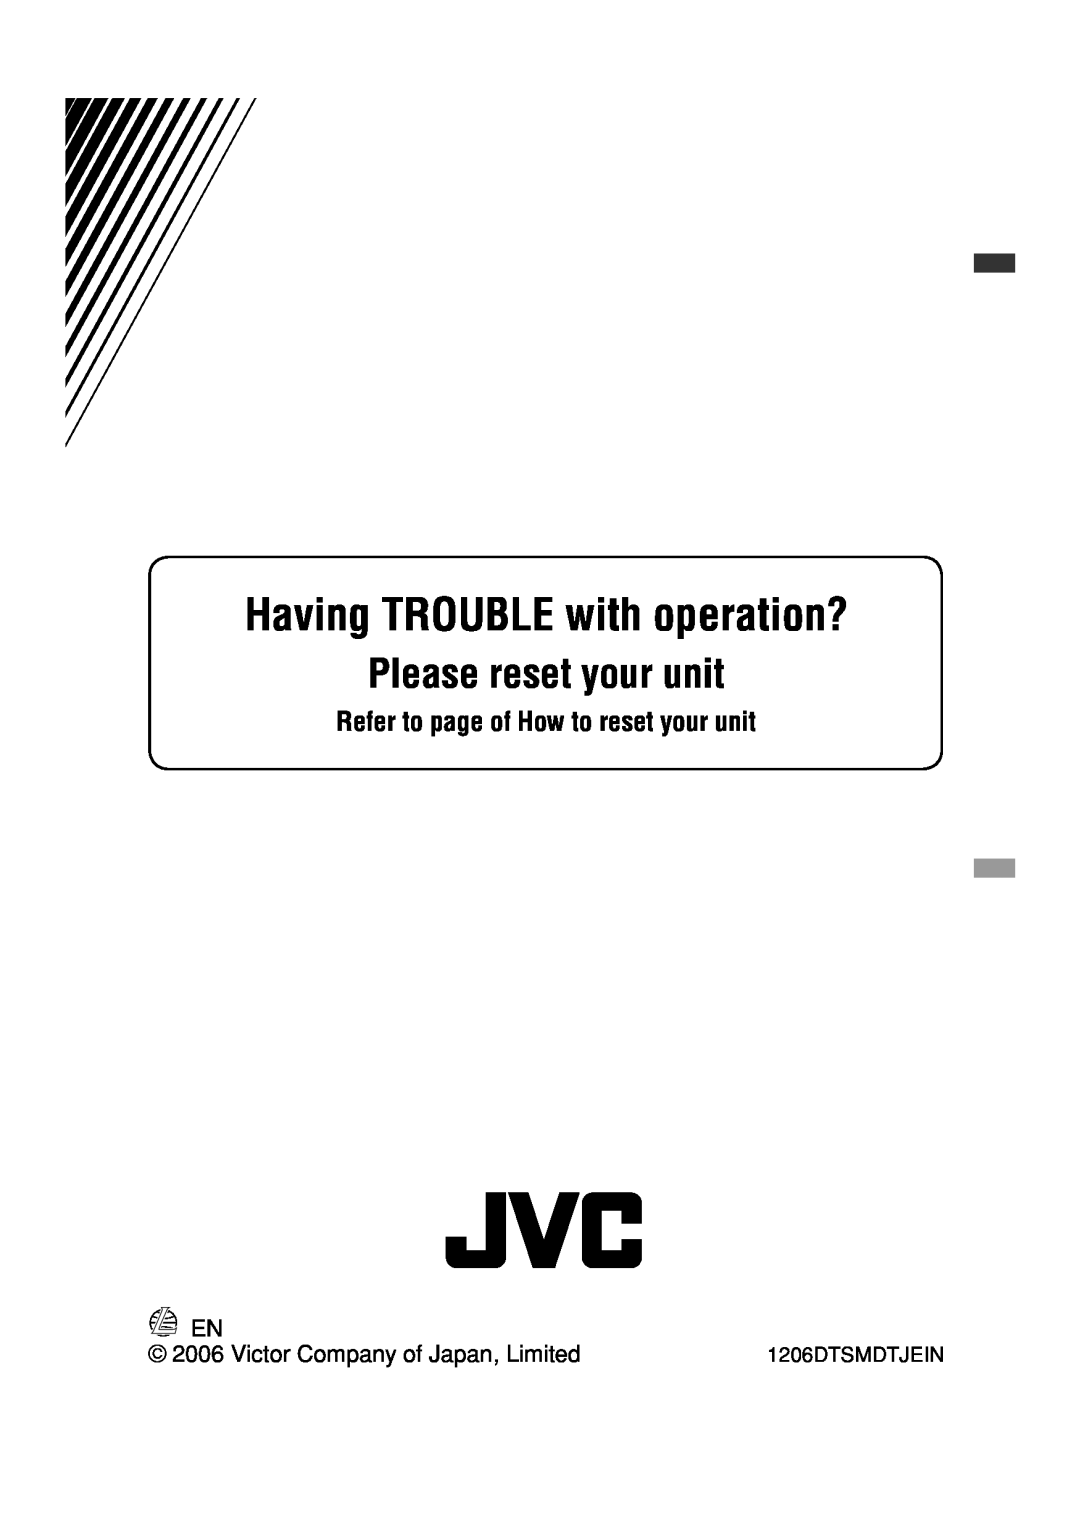 JVC GET0425-001A manual Having TROUBLE with operation?, Please reset your unit, Refer to page of How to reset your unit 